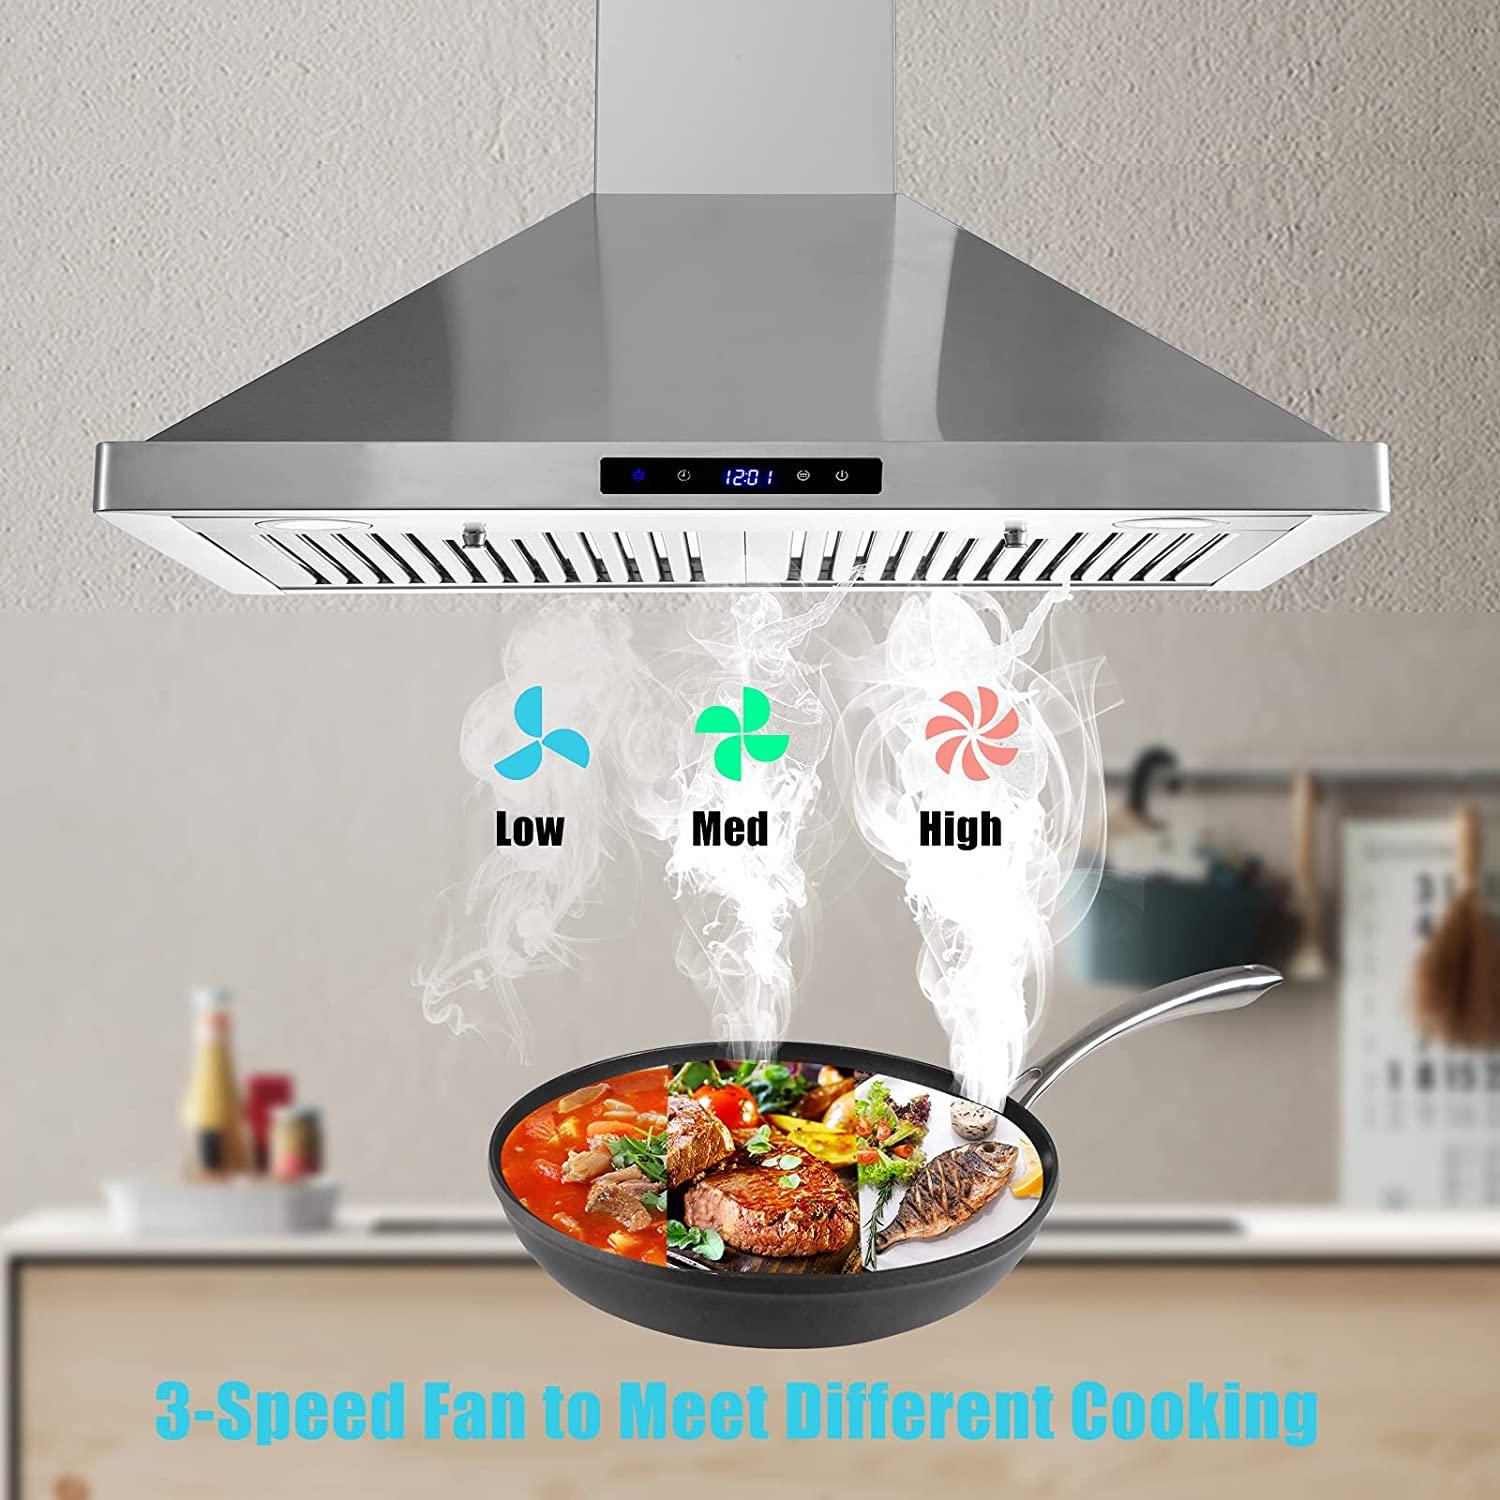 Tieasy 30 inch Wall Mount Range Hood, Ducted/Ductless Convertible with 3 Speed Kitchen Vent Hood, Touch Control